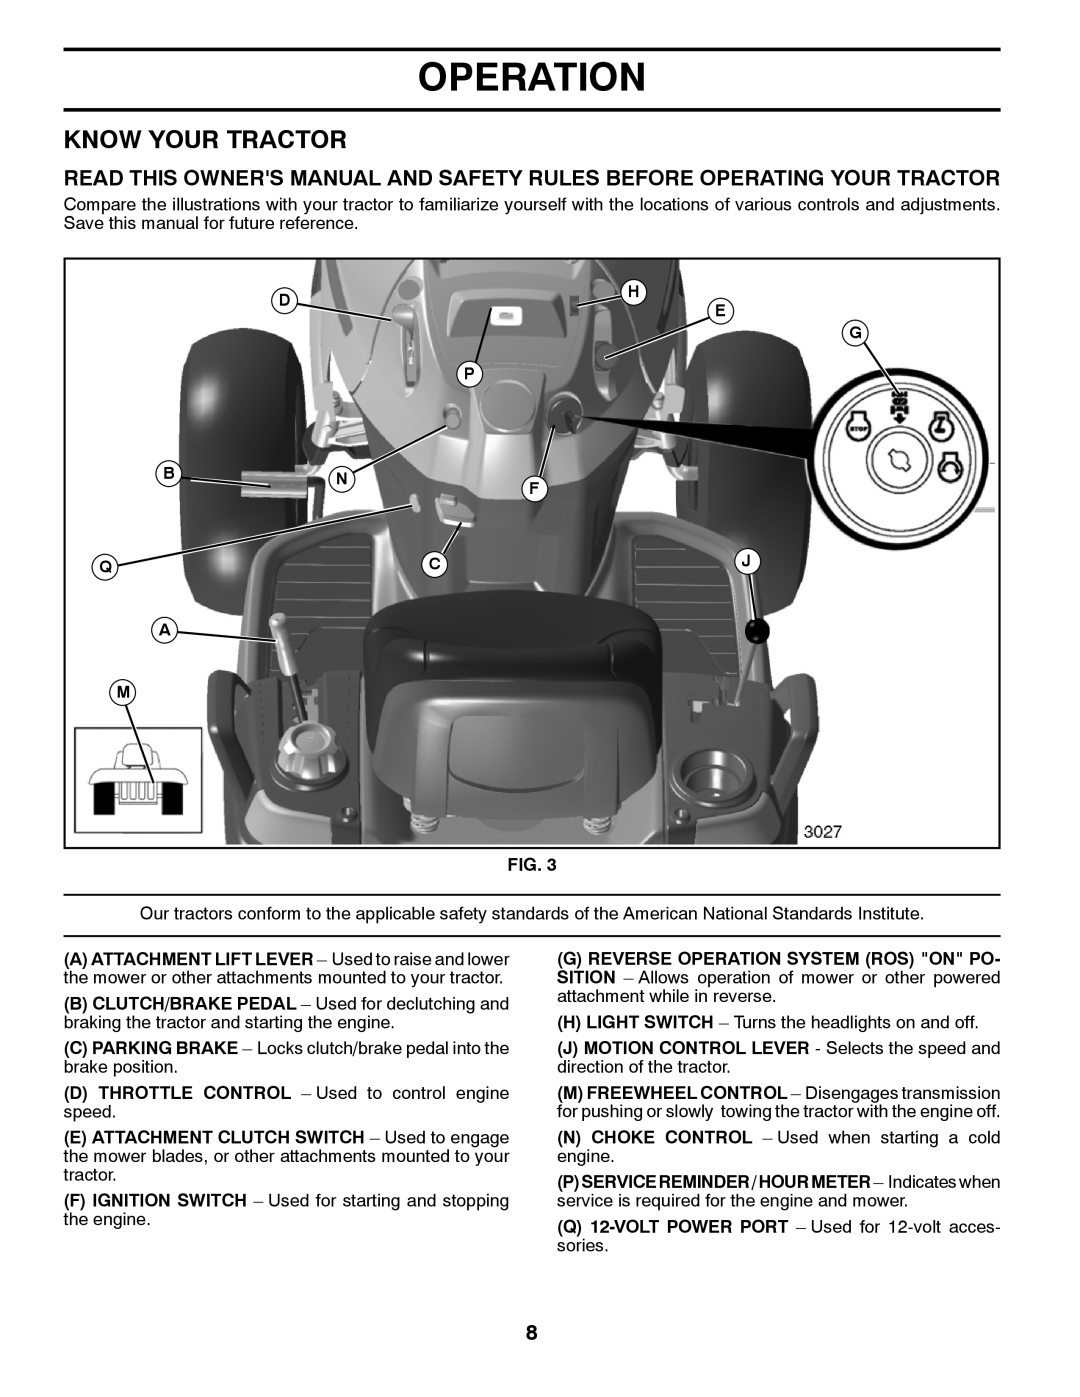 Husqvarna 2748 GLS (CA) manual Know Your Tractor, Operation, Fig 